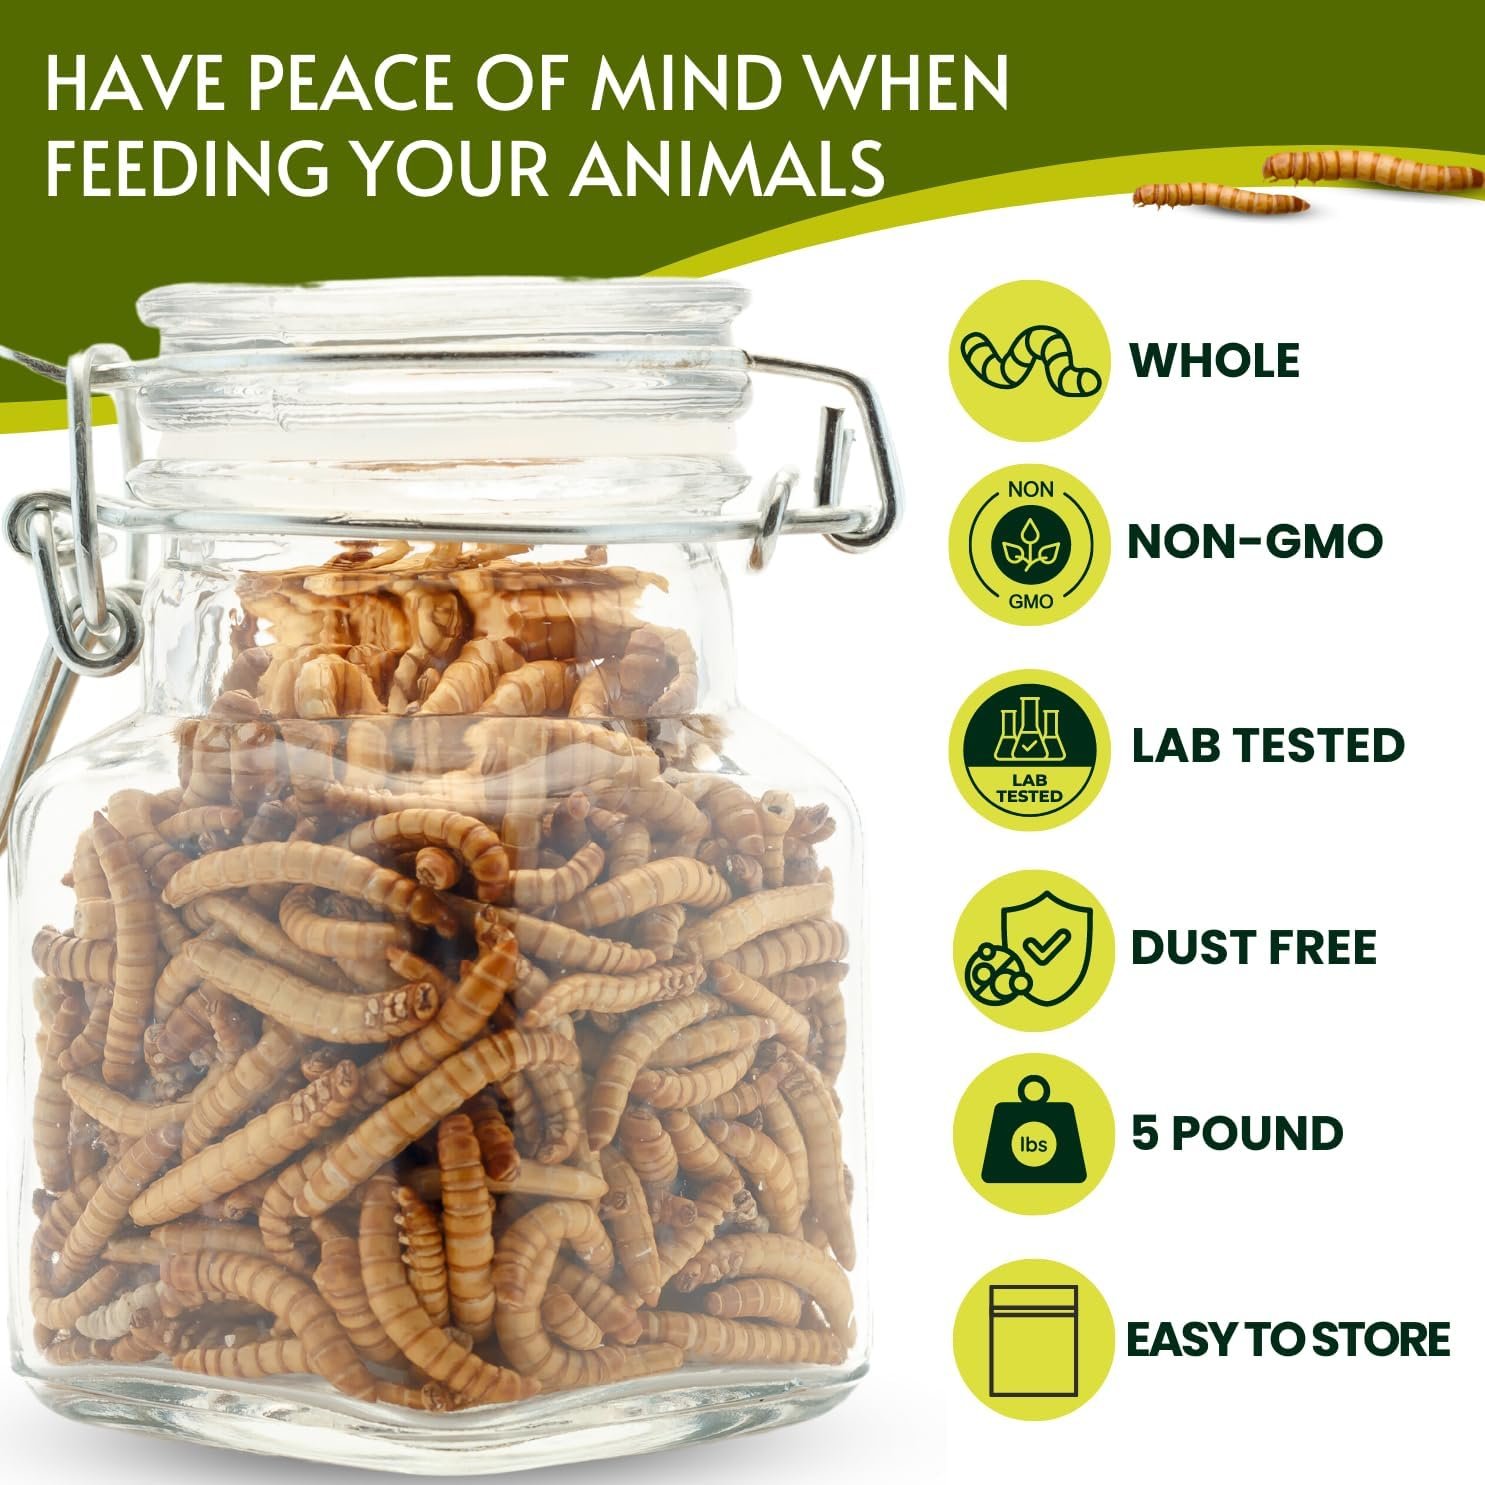 PICKY NEB 100% Non-GMO Dried Mealworms 5 lb - Whole Large Meal Worms Bulk - High-Protein Treats Perfect for Your Chickens, Ducks, Wild Birds